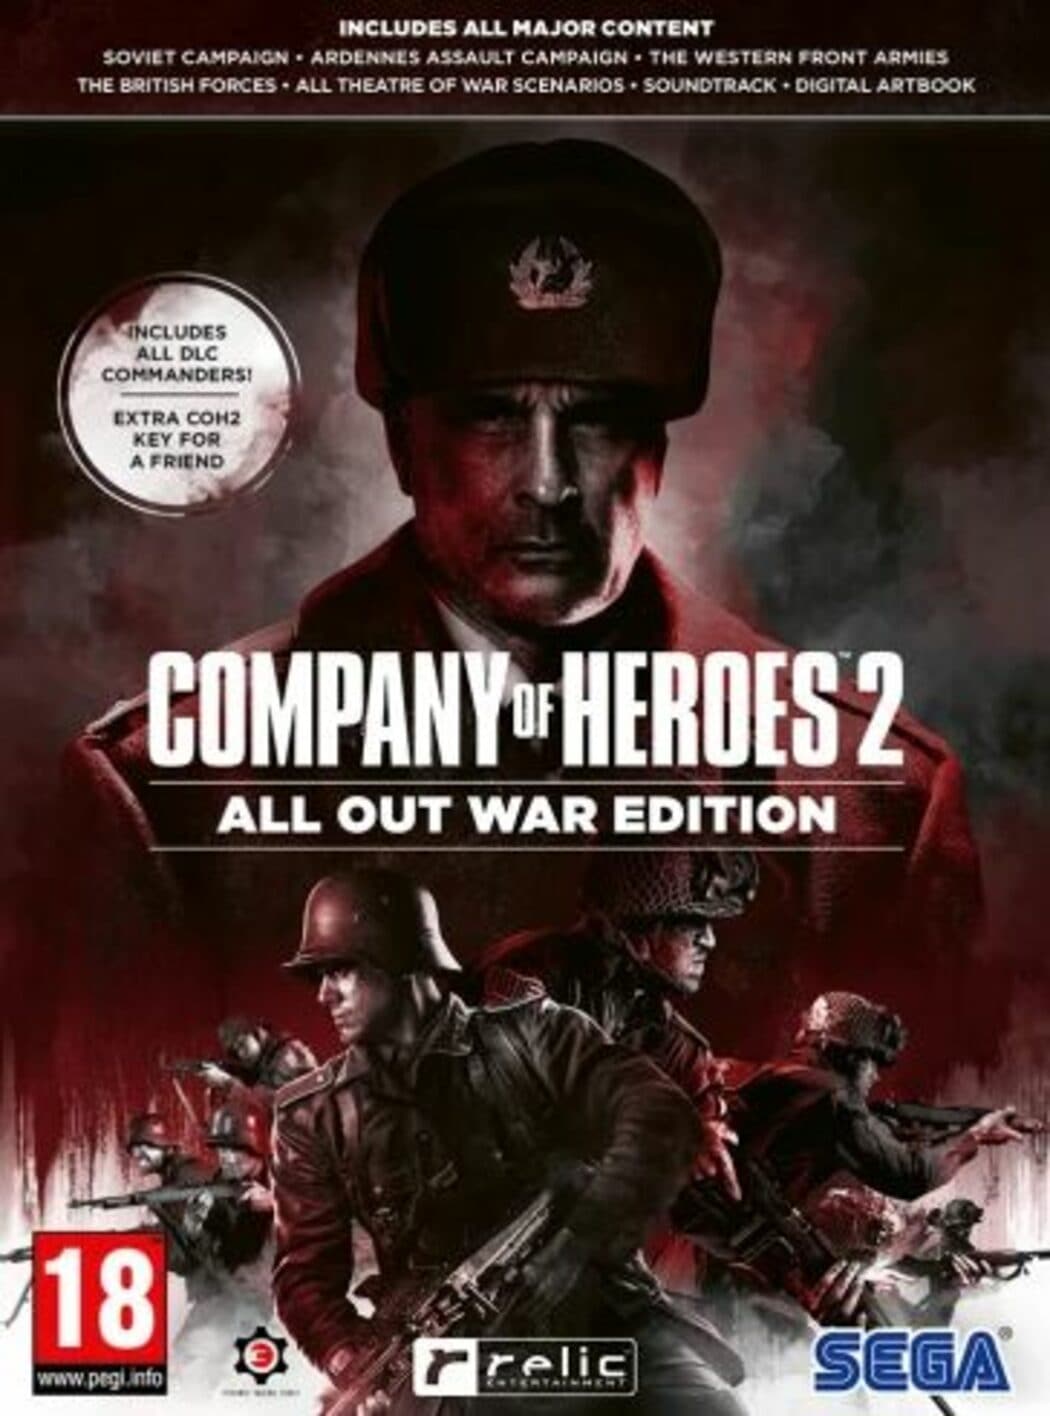 Company of Heroes 2 (All Out War Edition) - למחשב